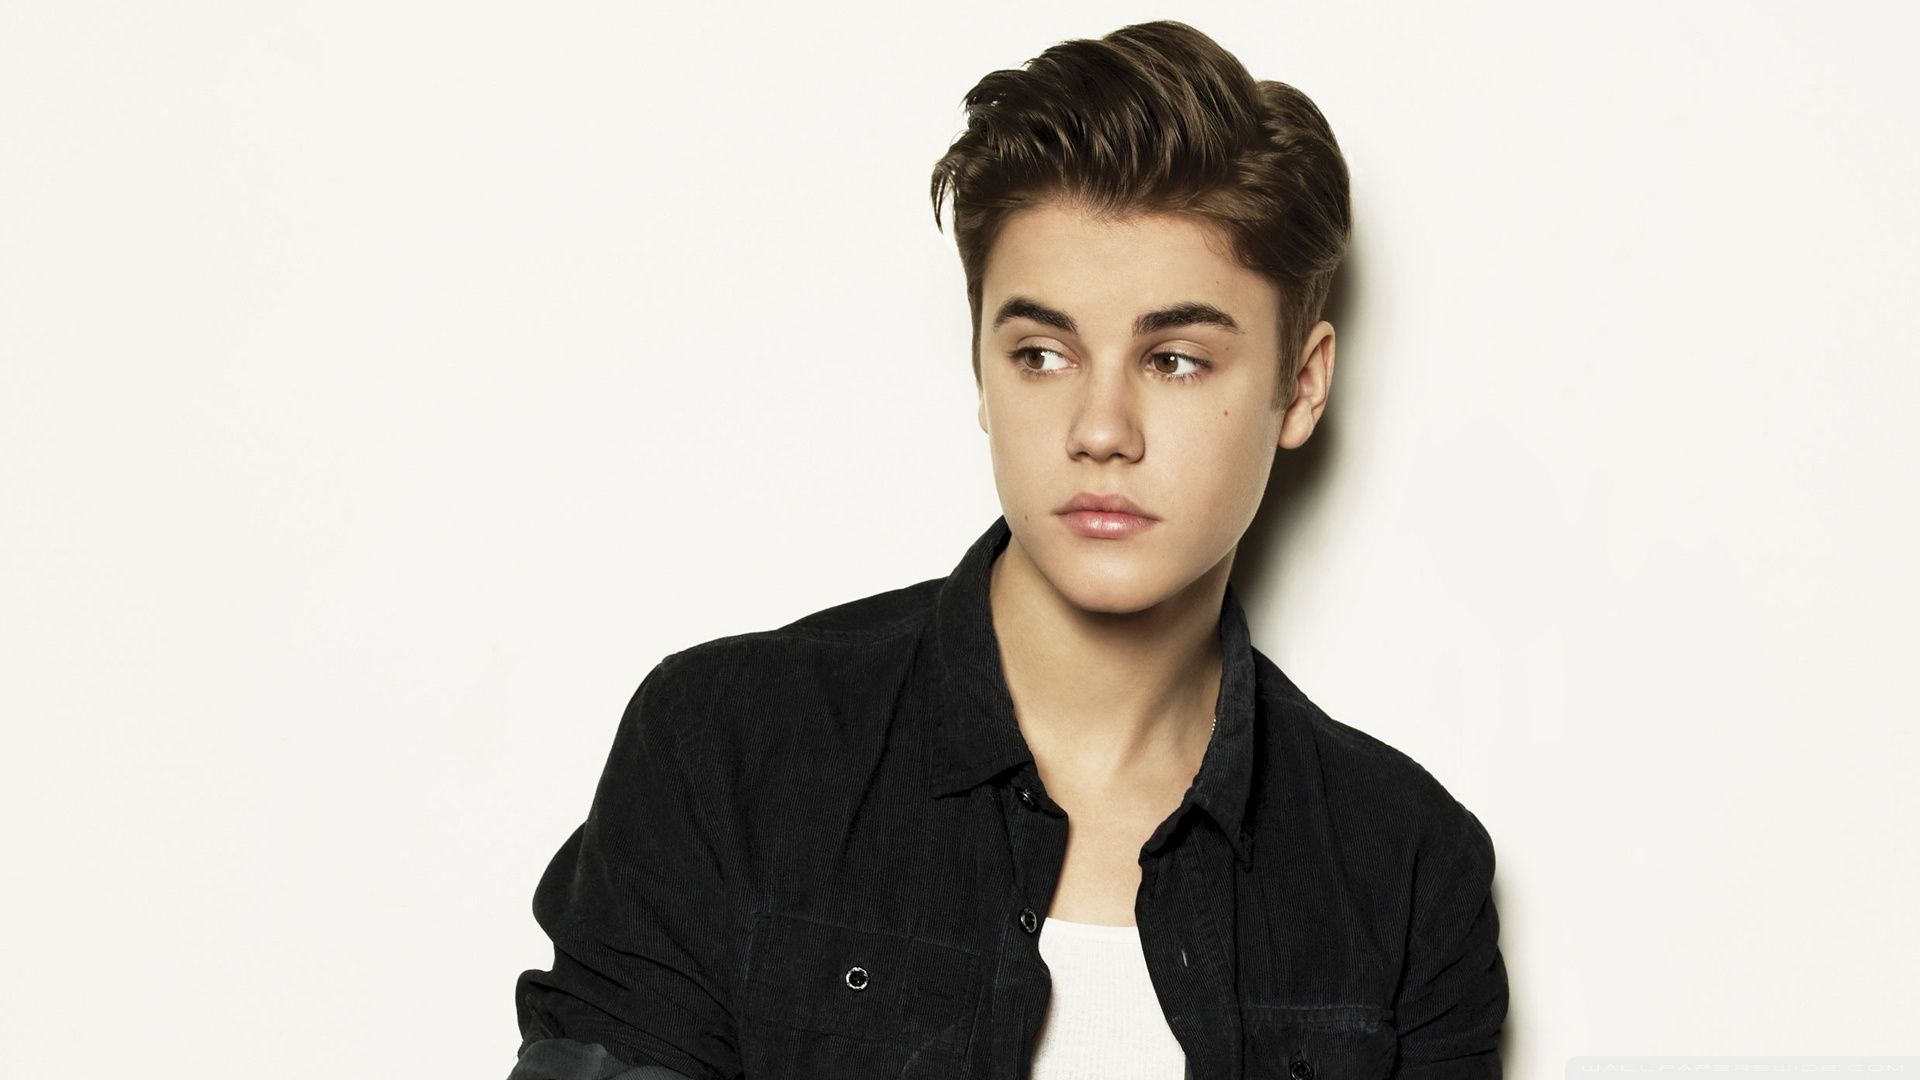 Young Justin Bieber Wallpaper HD Backgrounds